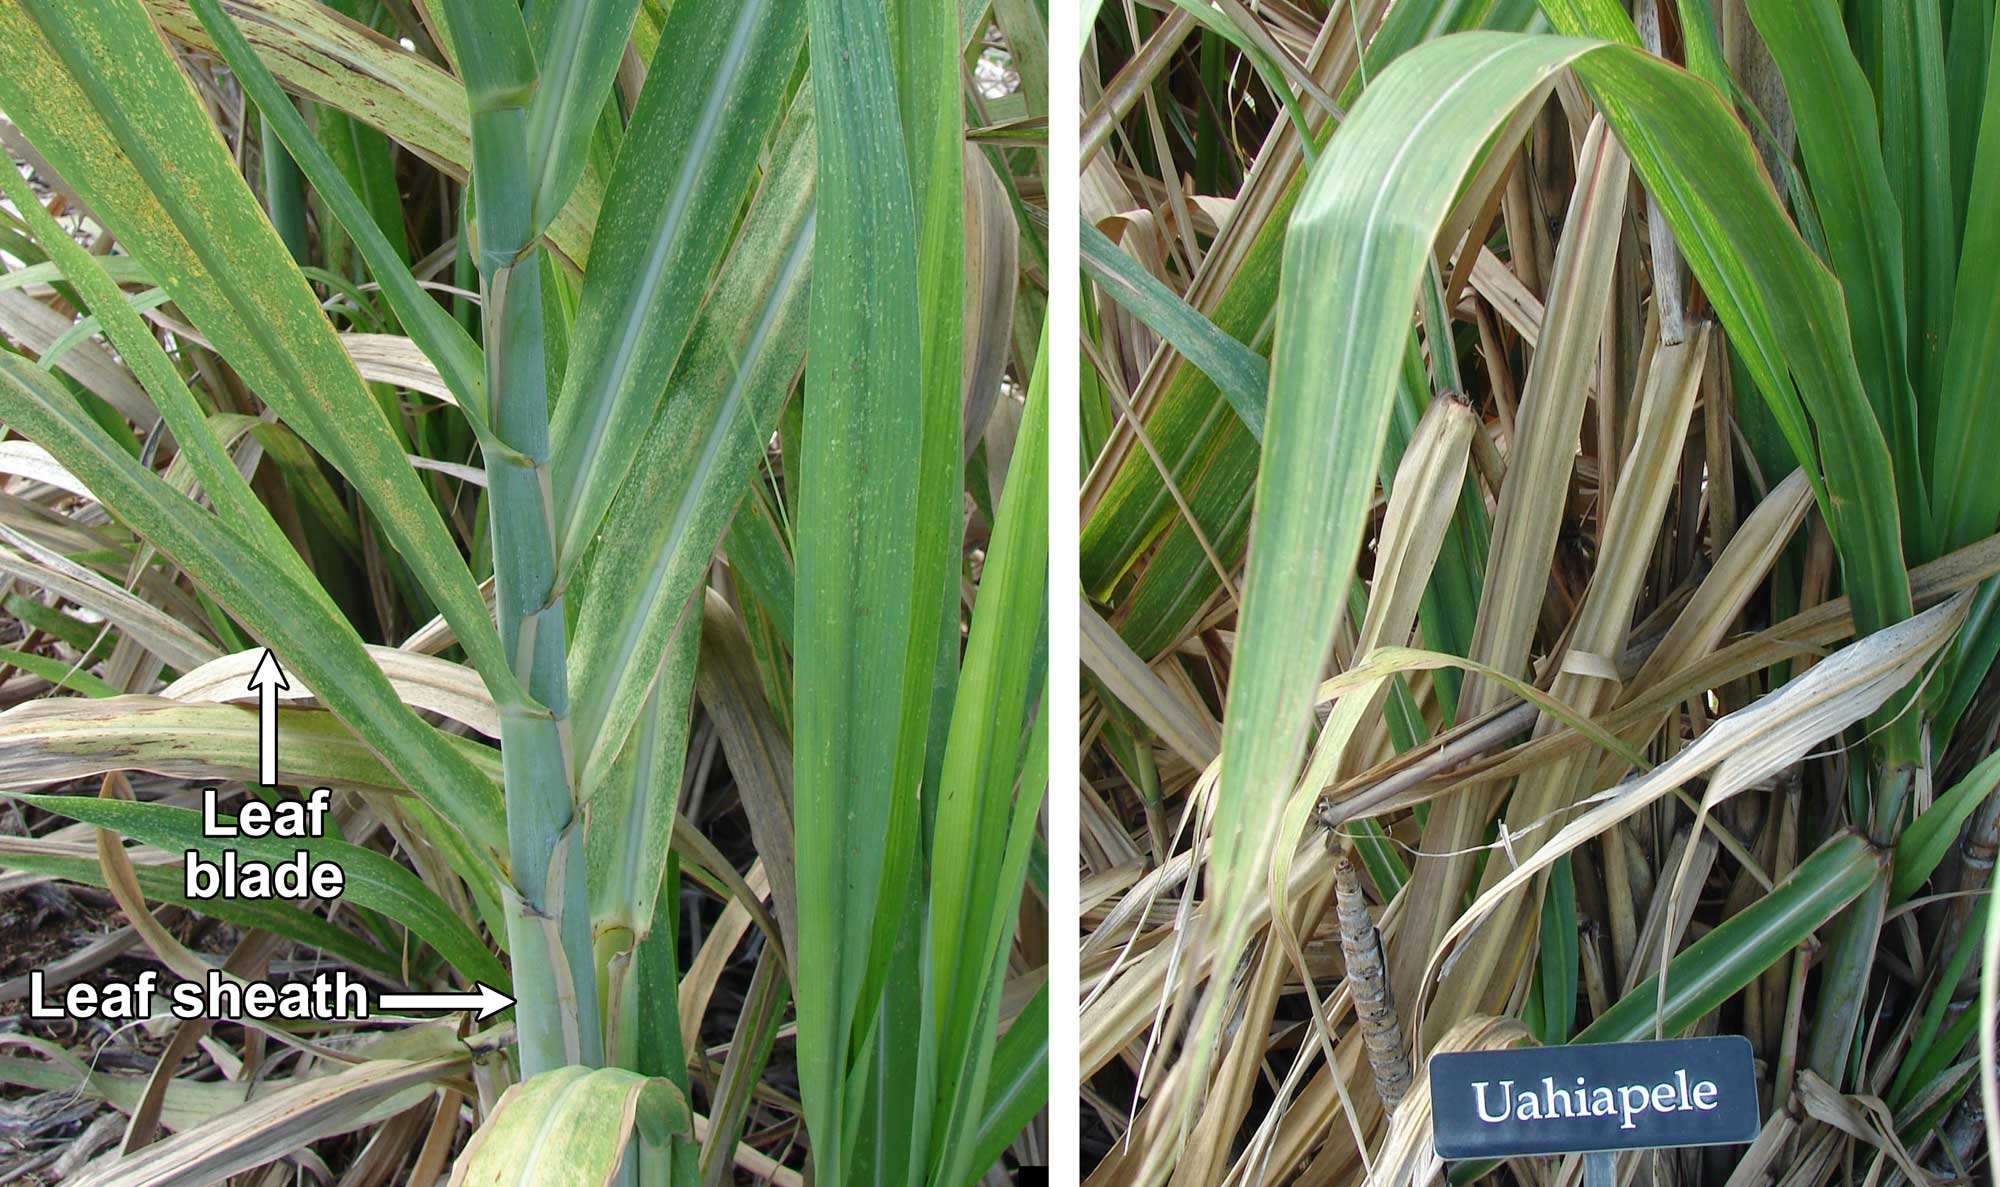 Two-panel photograph figure made up of pictures showing sugarcane leaves. Panel 1: Portion of a sugarcane stem and leaf bases. The photo shows a stem with alternately arranged leaves. Each leaf has a green sheath with tan margins clasping the stem and a green blade angled away from the stem. Panel 2: Photo showing a portion of a leaf blade arching toward the viewer. The leaf is elongated and green with a lighter midrib.